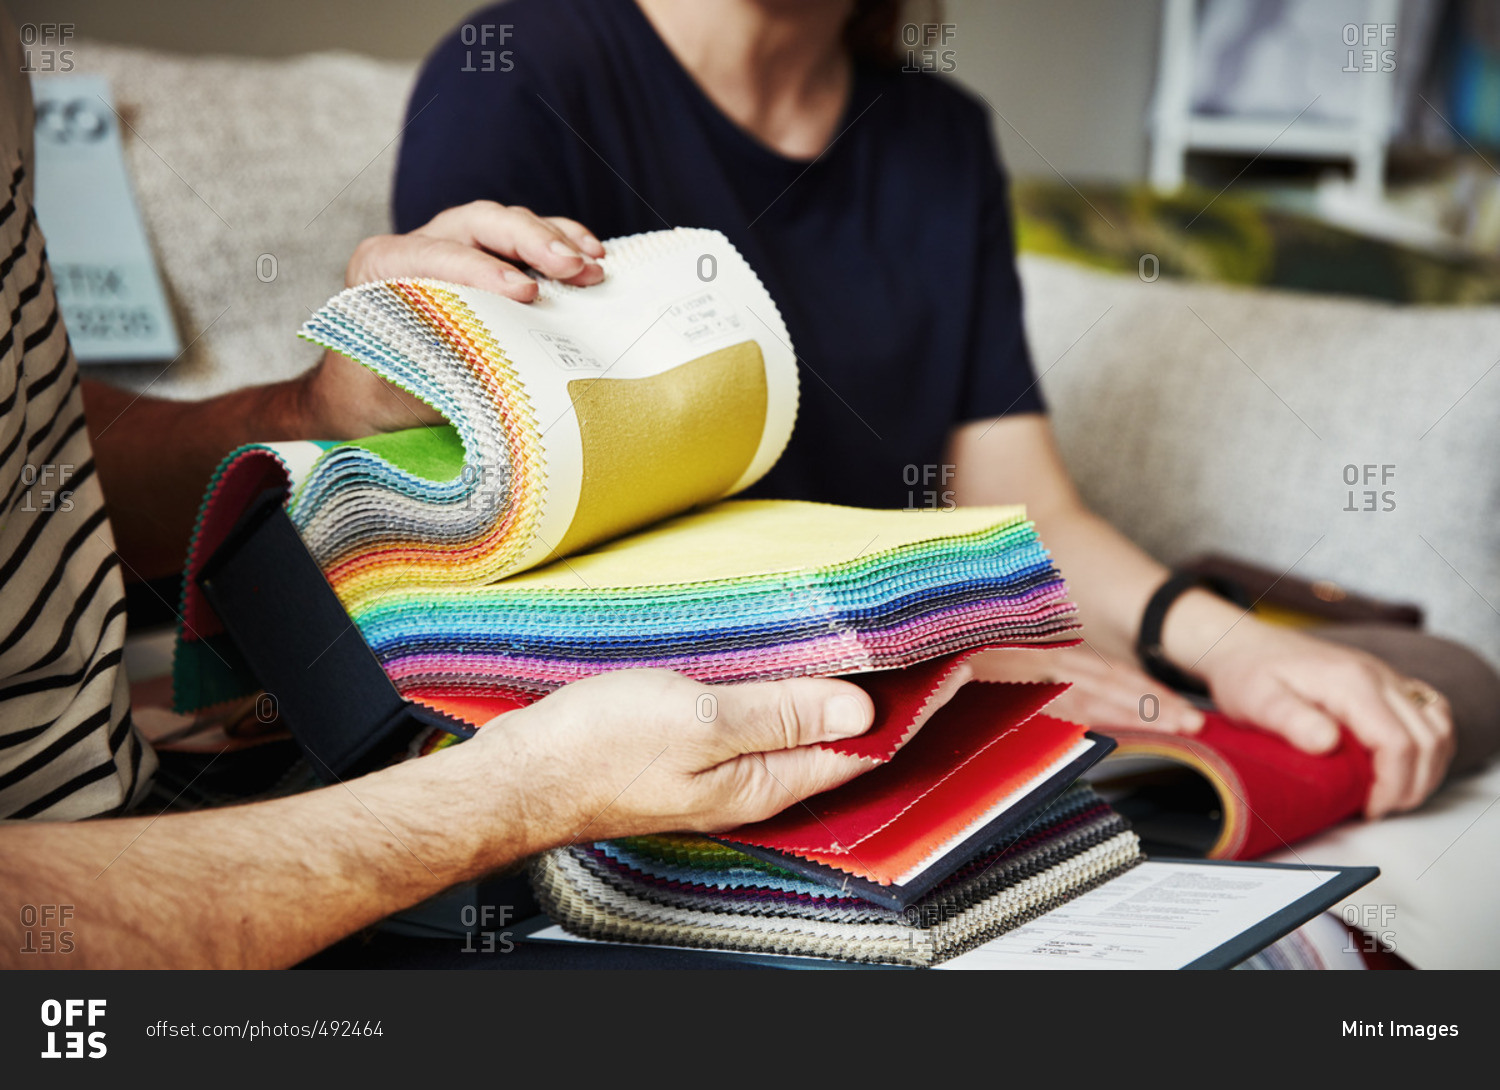 Two people sitting on a sofa, looking at a selection of fabric samples.